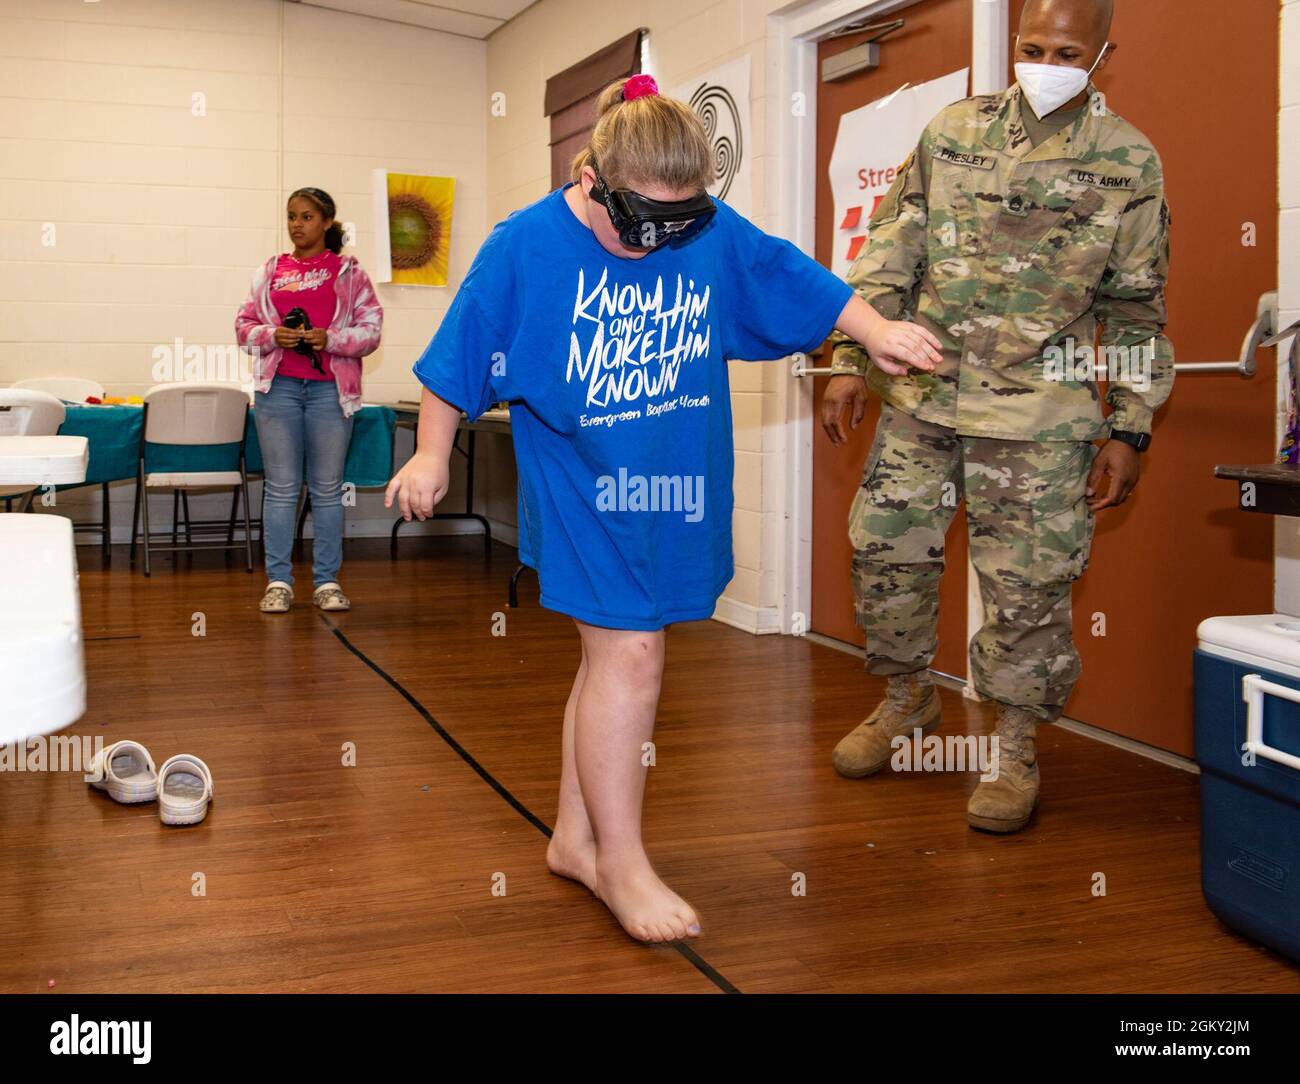 A camper attending a week-long 4H day camp attempts to walk a straight line while wearing fatal vision goggles. The goggles are designed to simulate some effects of alcohol on the wearer. The theme of the week was Street SMARTS in which the students learn skills in the areas of safety, mindfulness, acceptance and resilience. Stock Photo